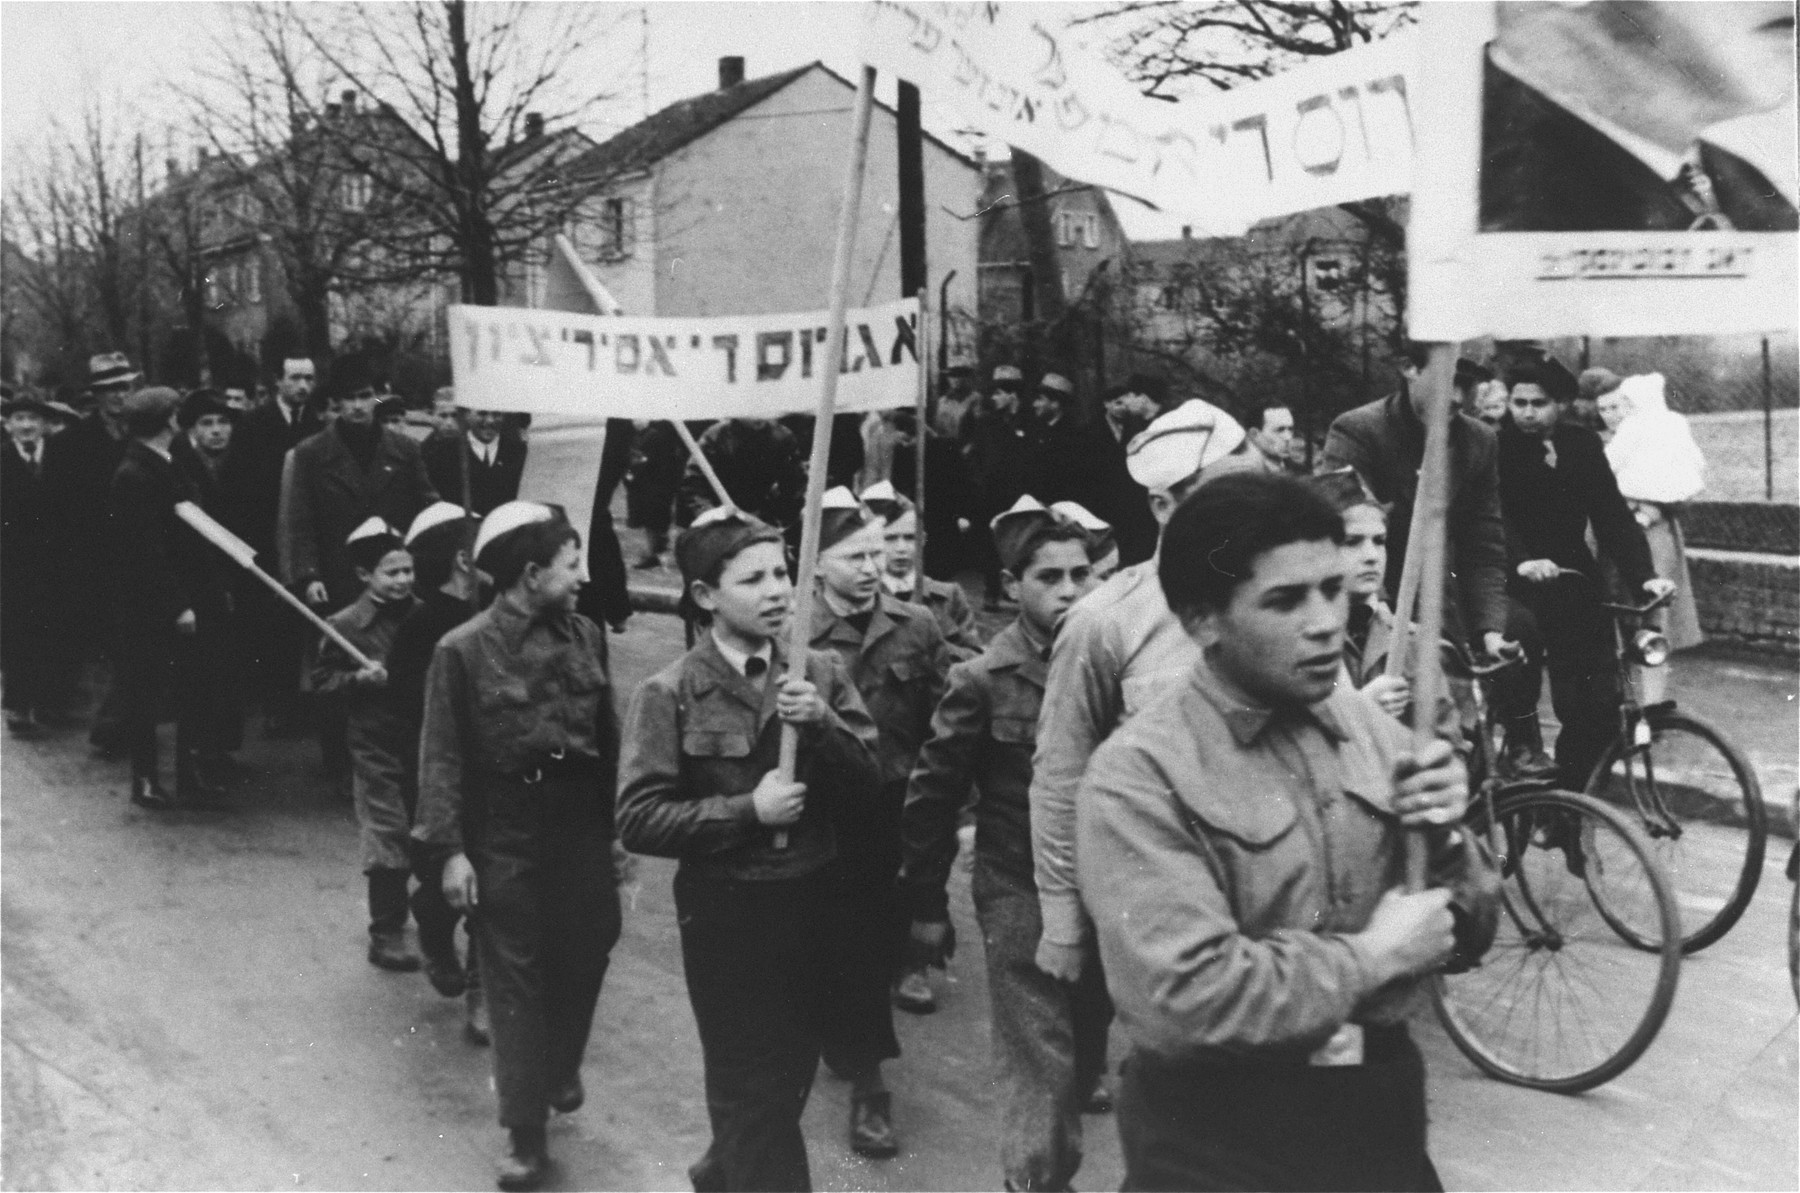 Children in the Zeilsheim displaced persons' camp carrying banners march in a demonstration for free immigration to Palestine.